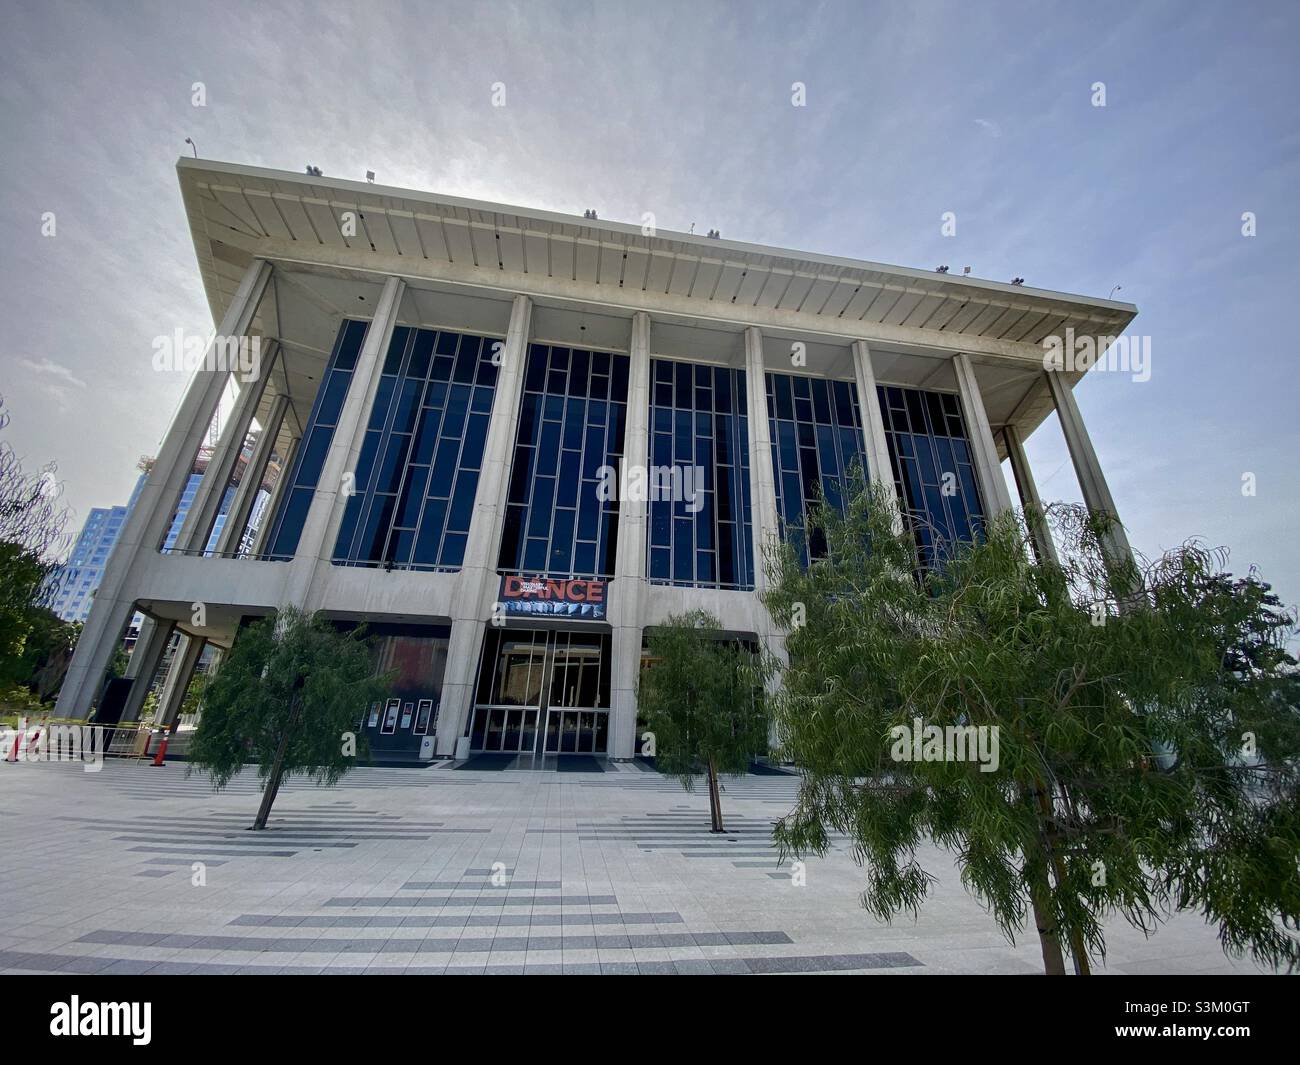 LOS ANGELES, CA, FEB 2021: wide angle view, looking up at the Dorothy Chandler Pavilion, home to the LA Opera at the Music Center in Downtown Stock Photo